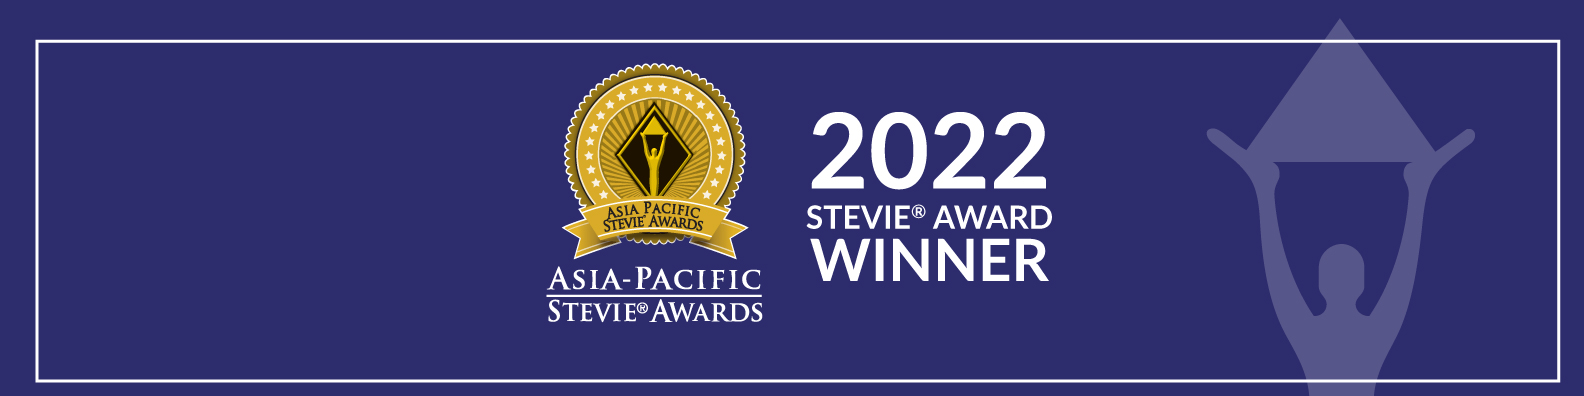 Global eTrade Services wins Bronze Stevie® Award in 2022 Asia-Pacific Stevie Awards 